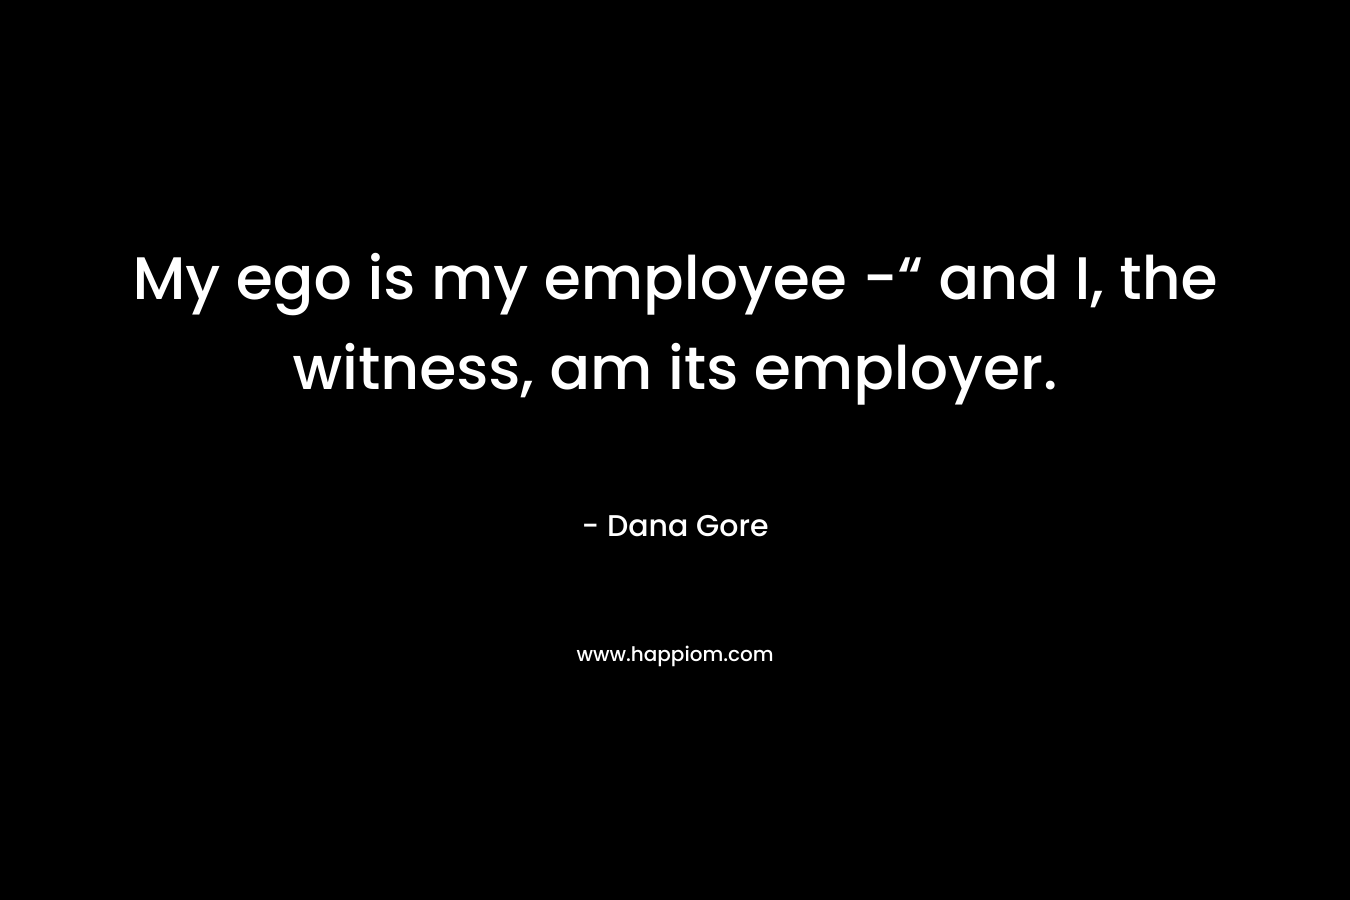 My ego is my employee -“ and I, the witness, am its employer.